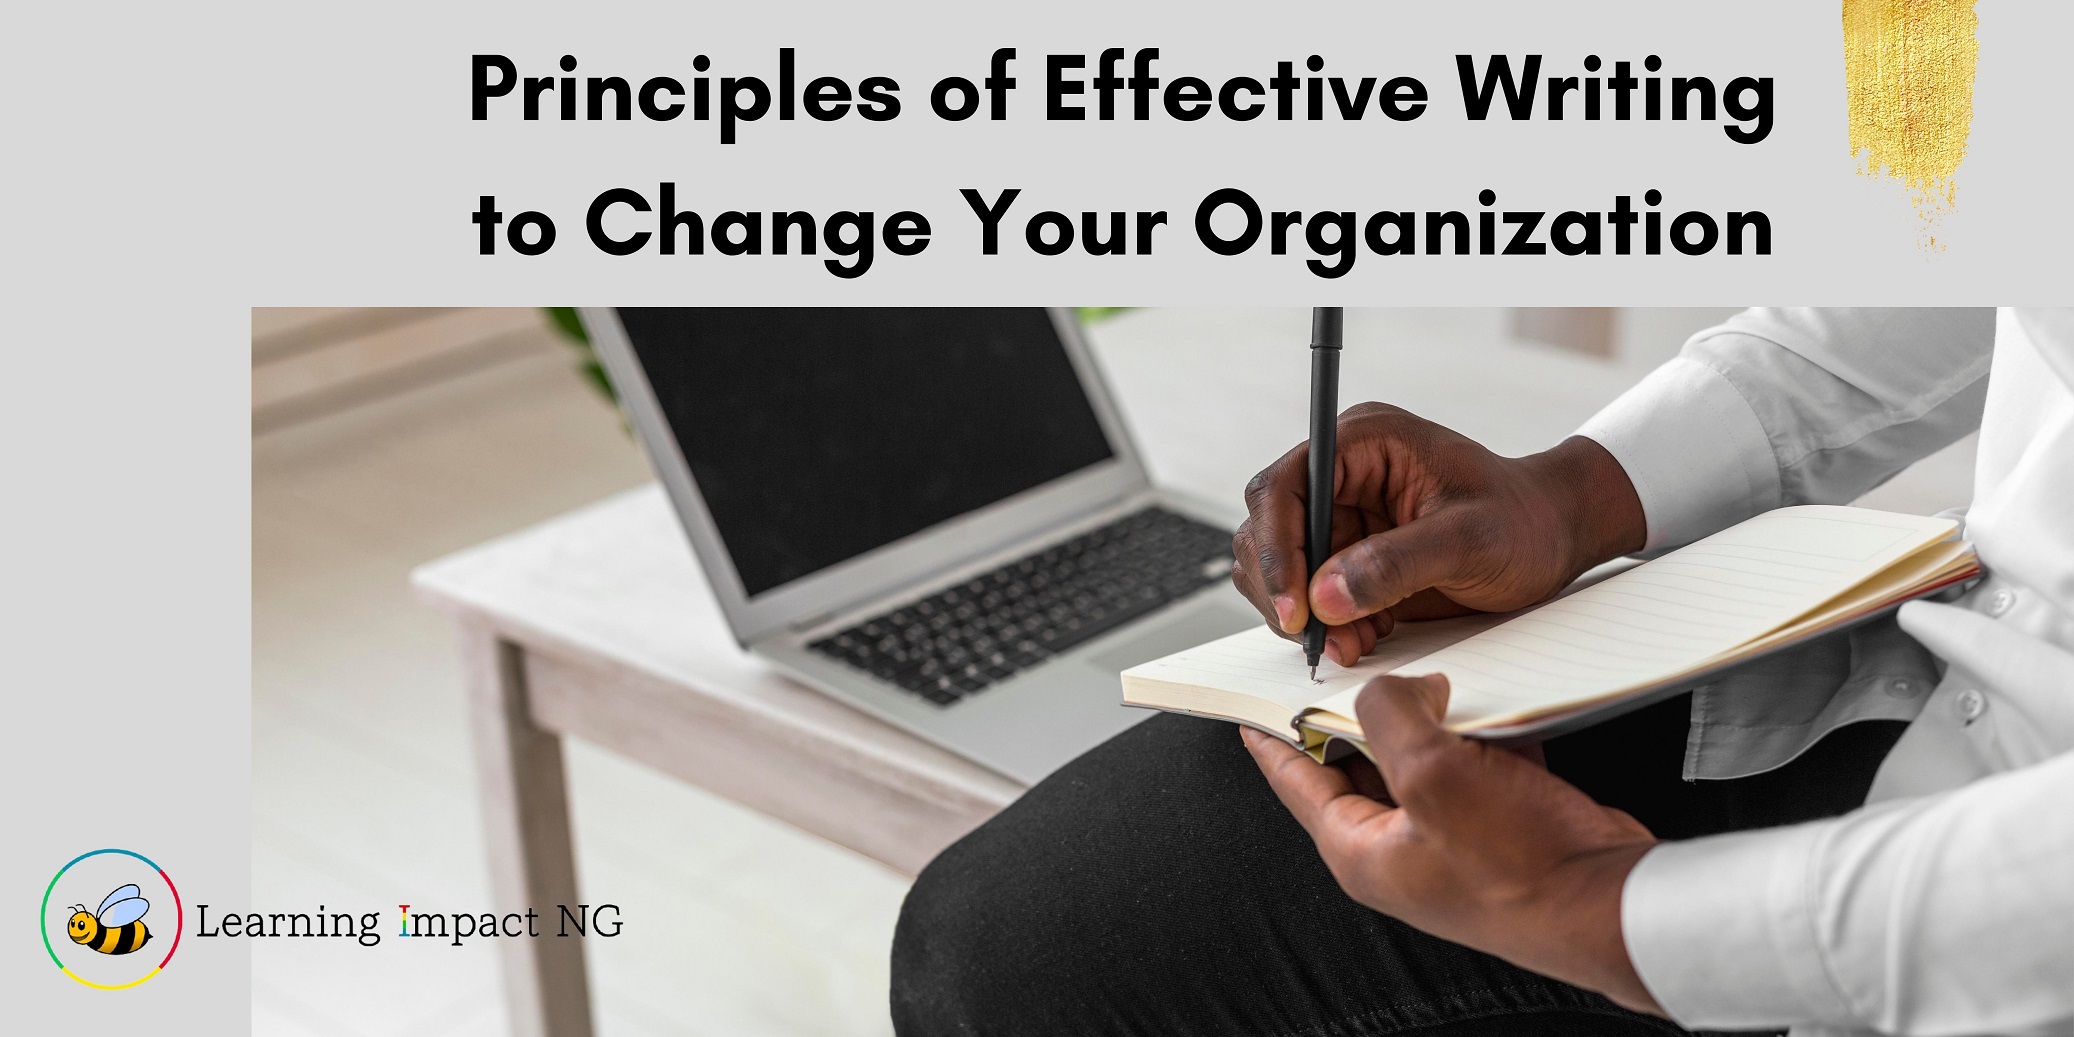 Principles of Effective Writing to Change Your Organization